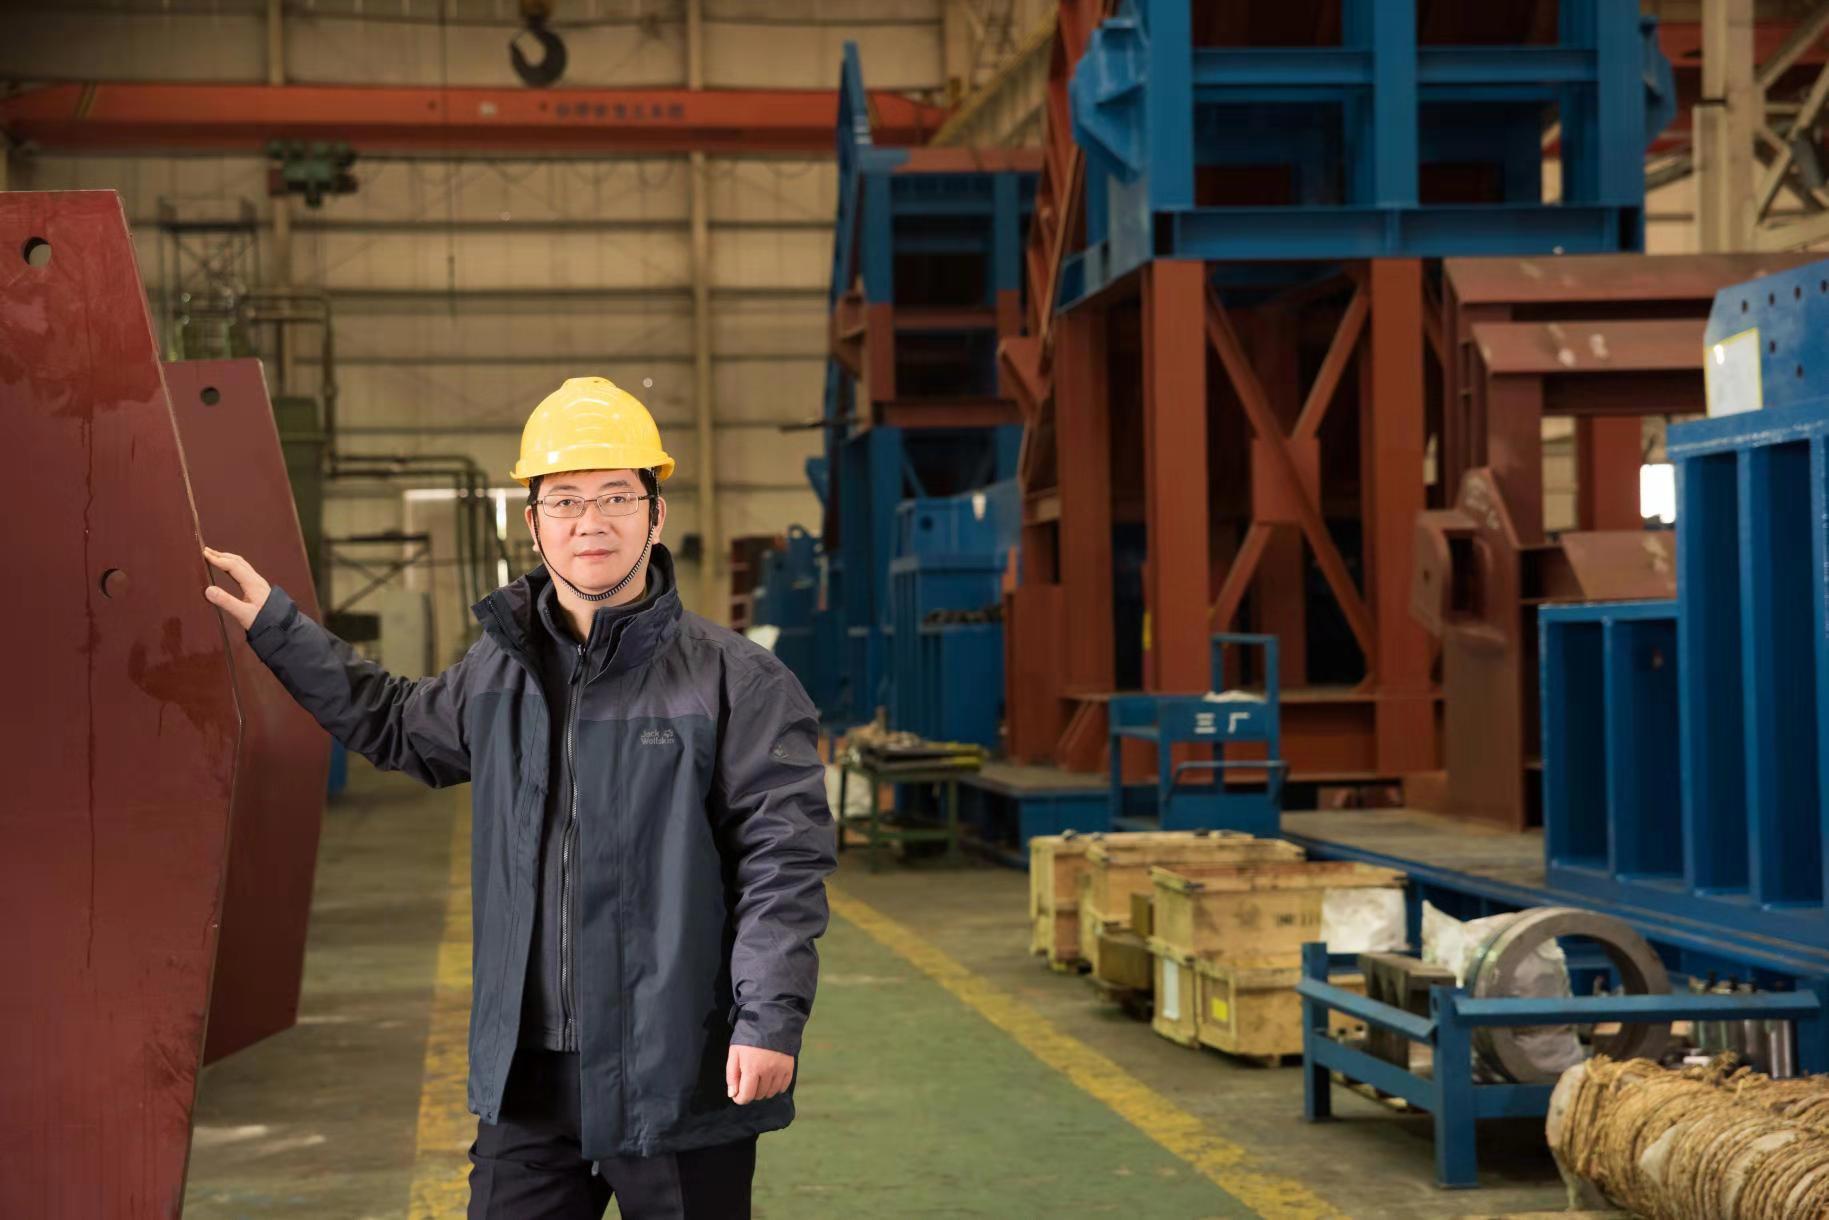 Leading the Chinese scrap steel processing equipment industry through third-generation inheritance